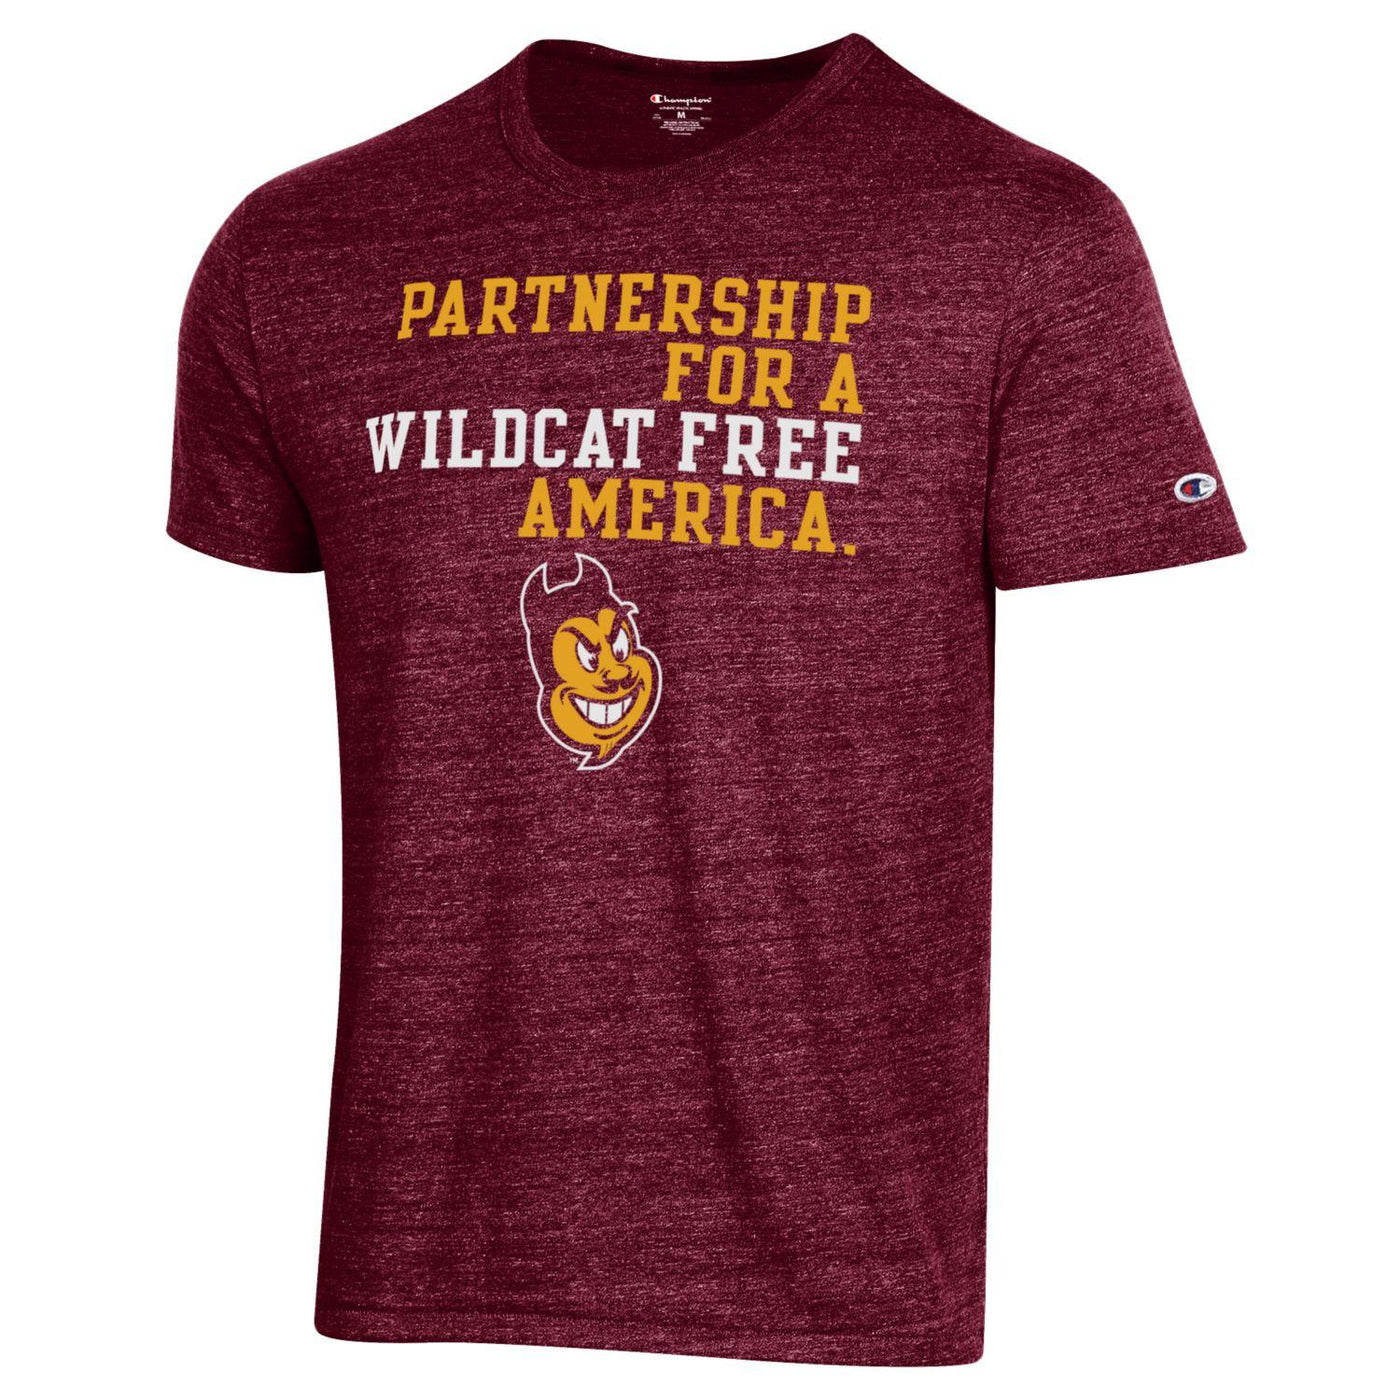 ASU maroon champion tee with Partnership for a wildcat free America printed above Sparky's head on front.